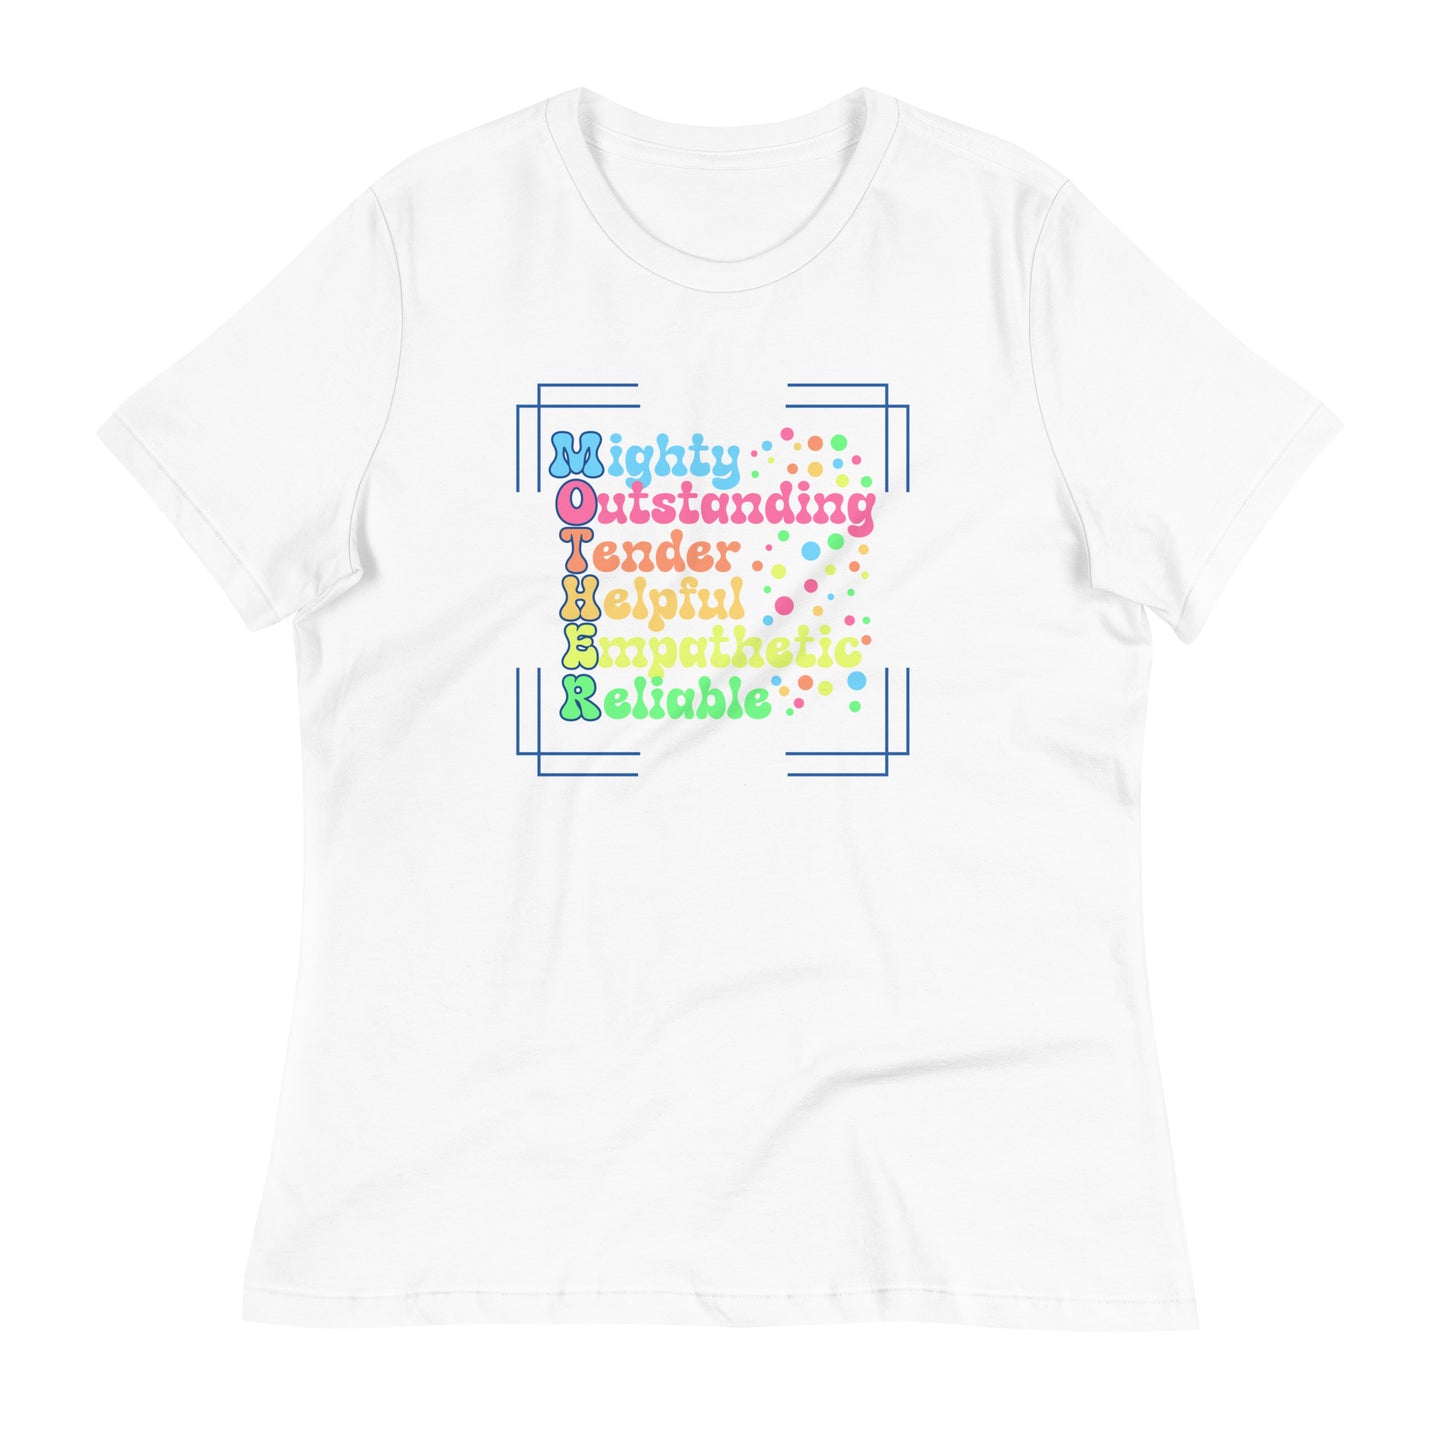 First Letters "Mother" Women's T-Shirt